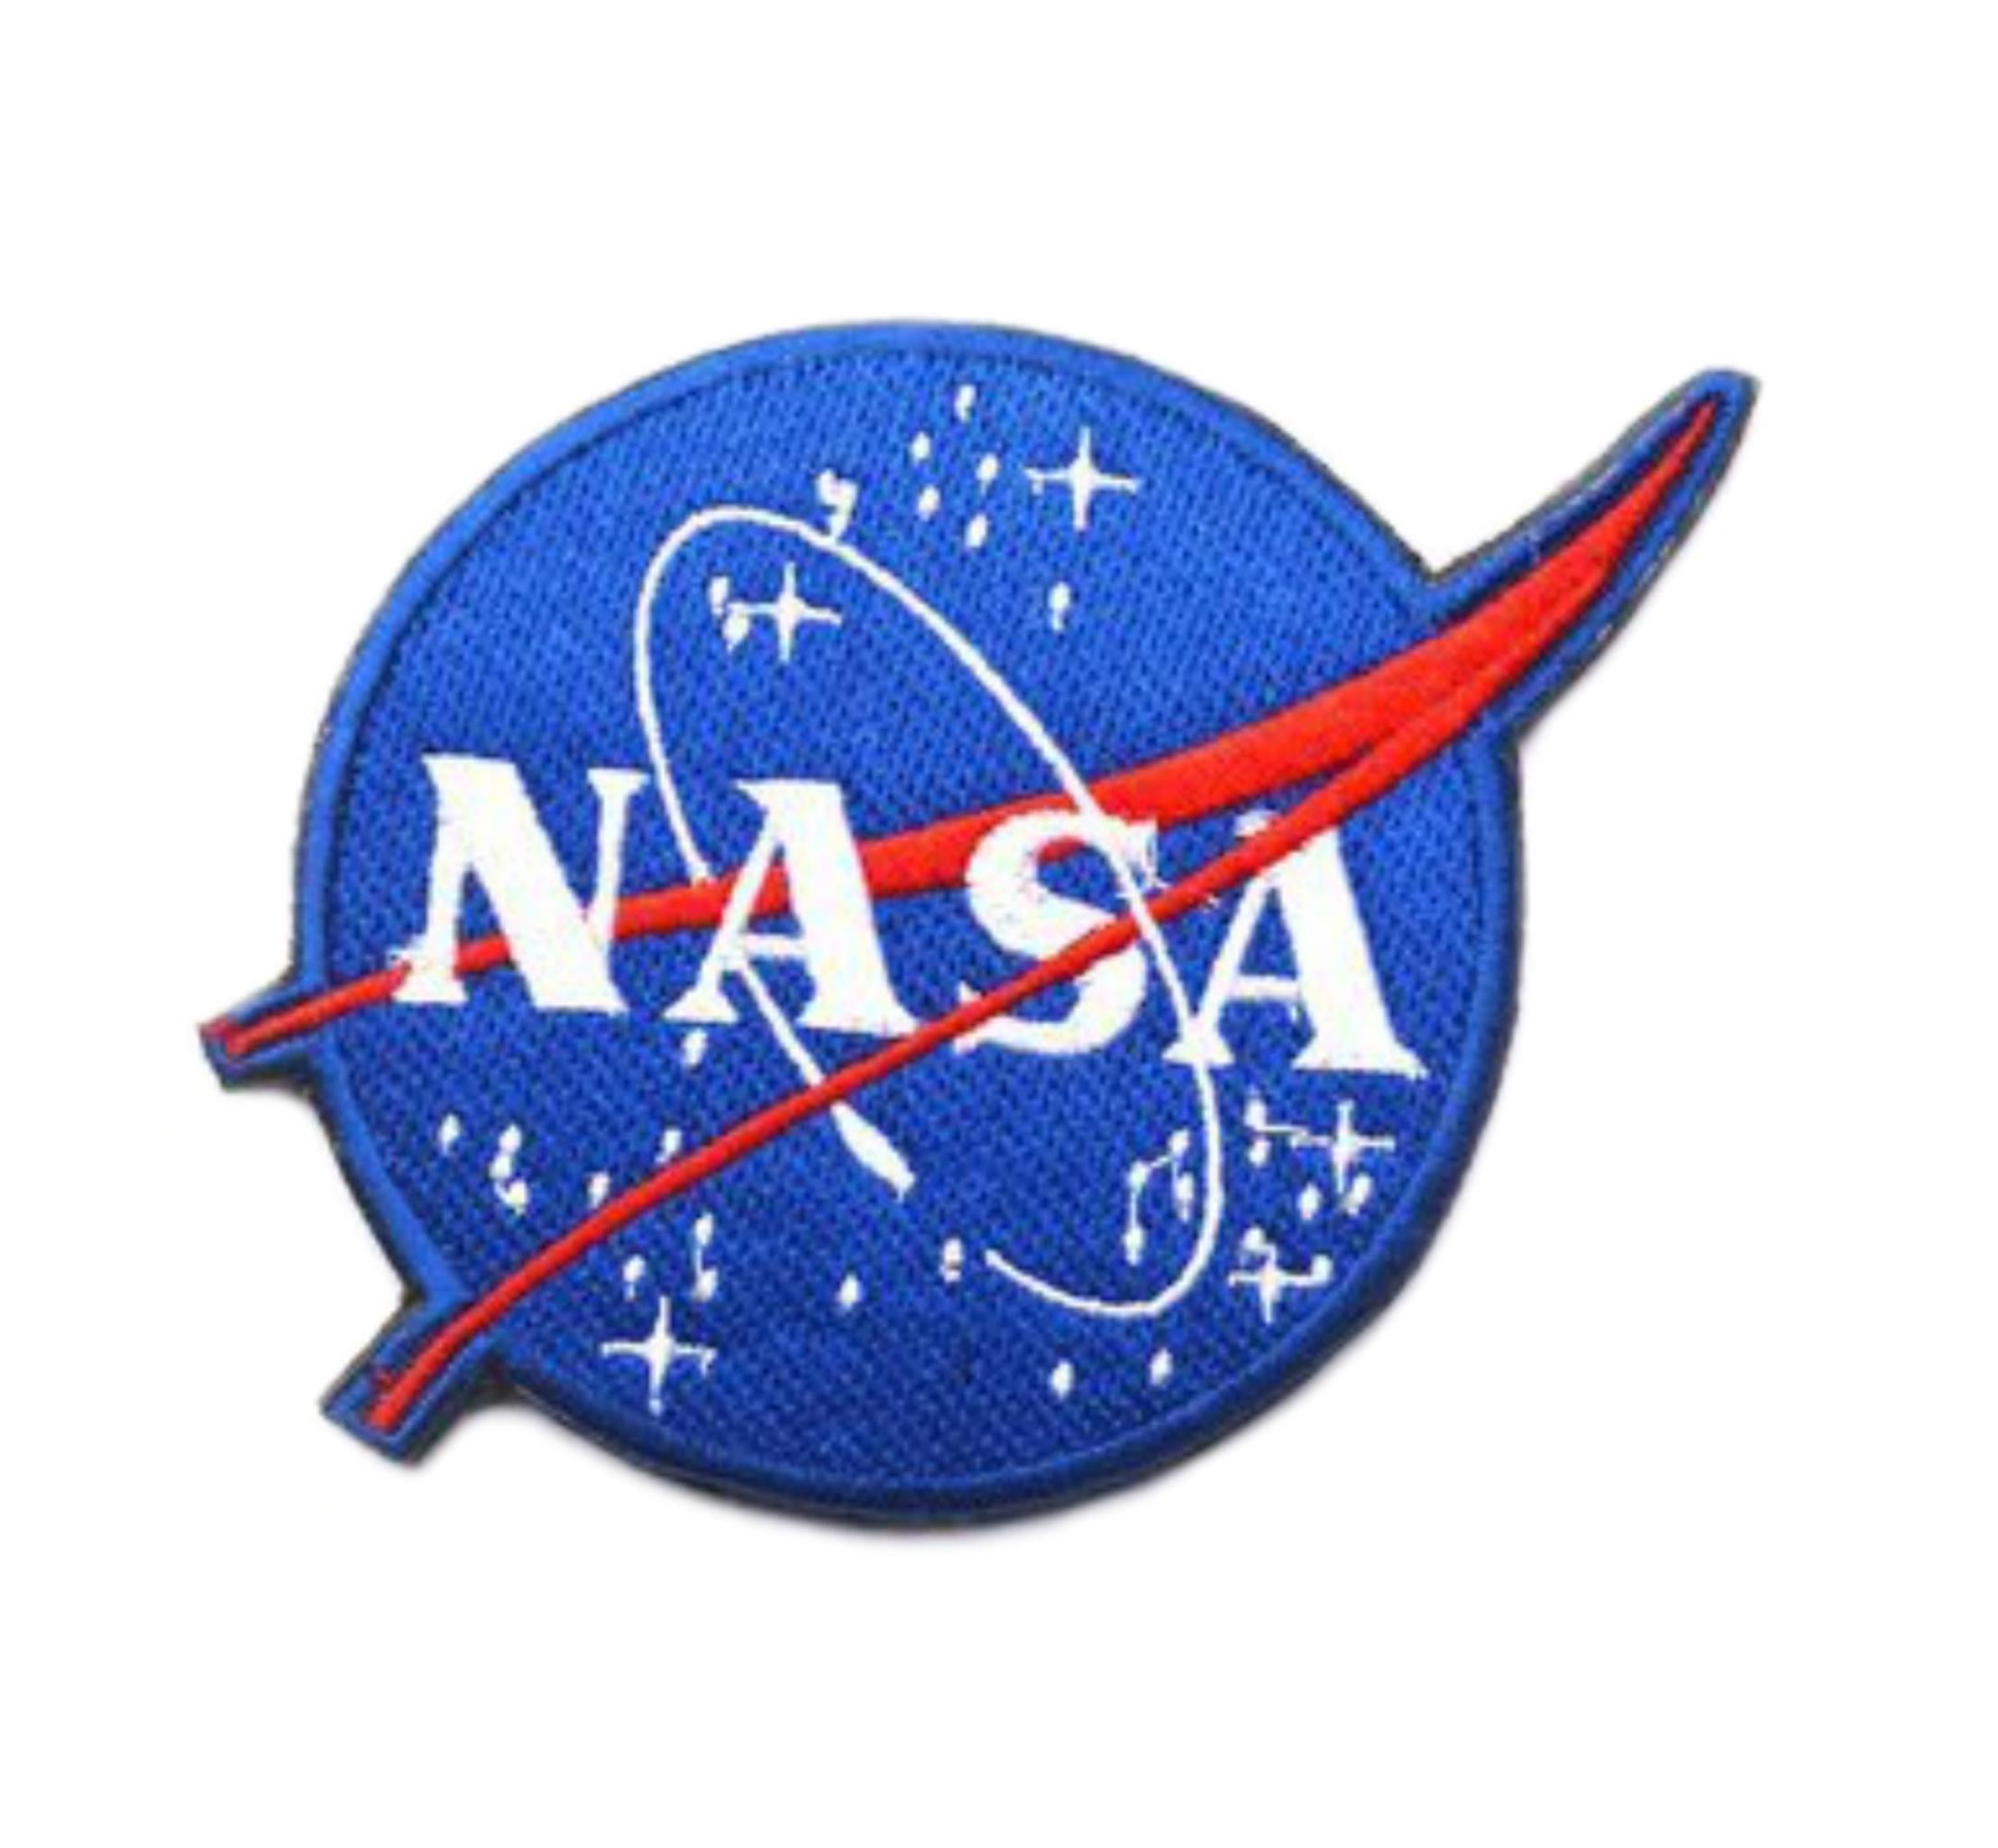 NASA Space Explorer Embroidered Patch Iron Sew-On Decorative Gear Applique 